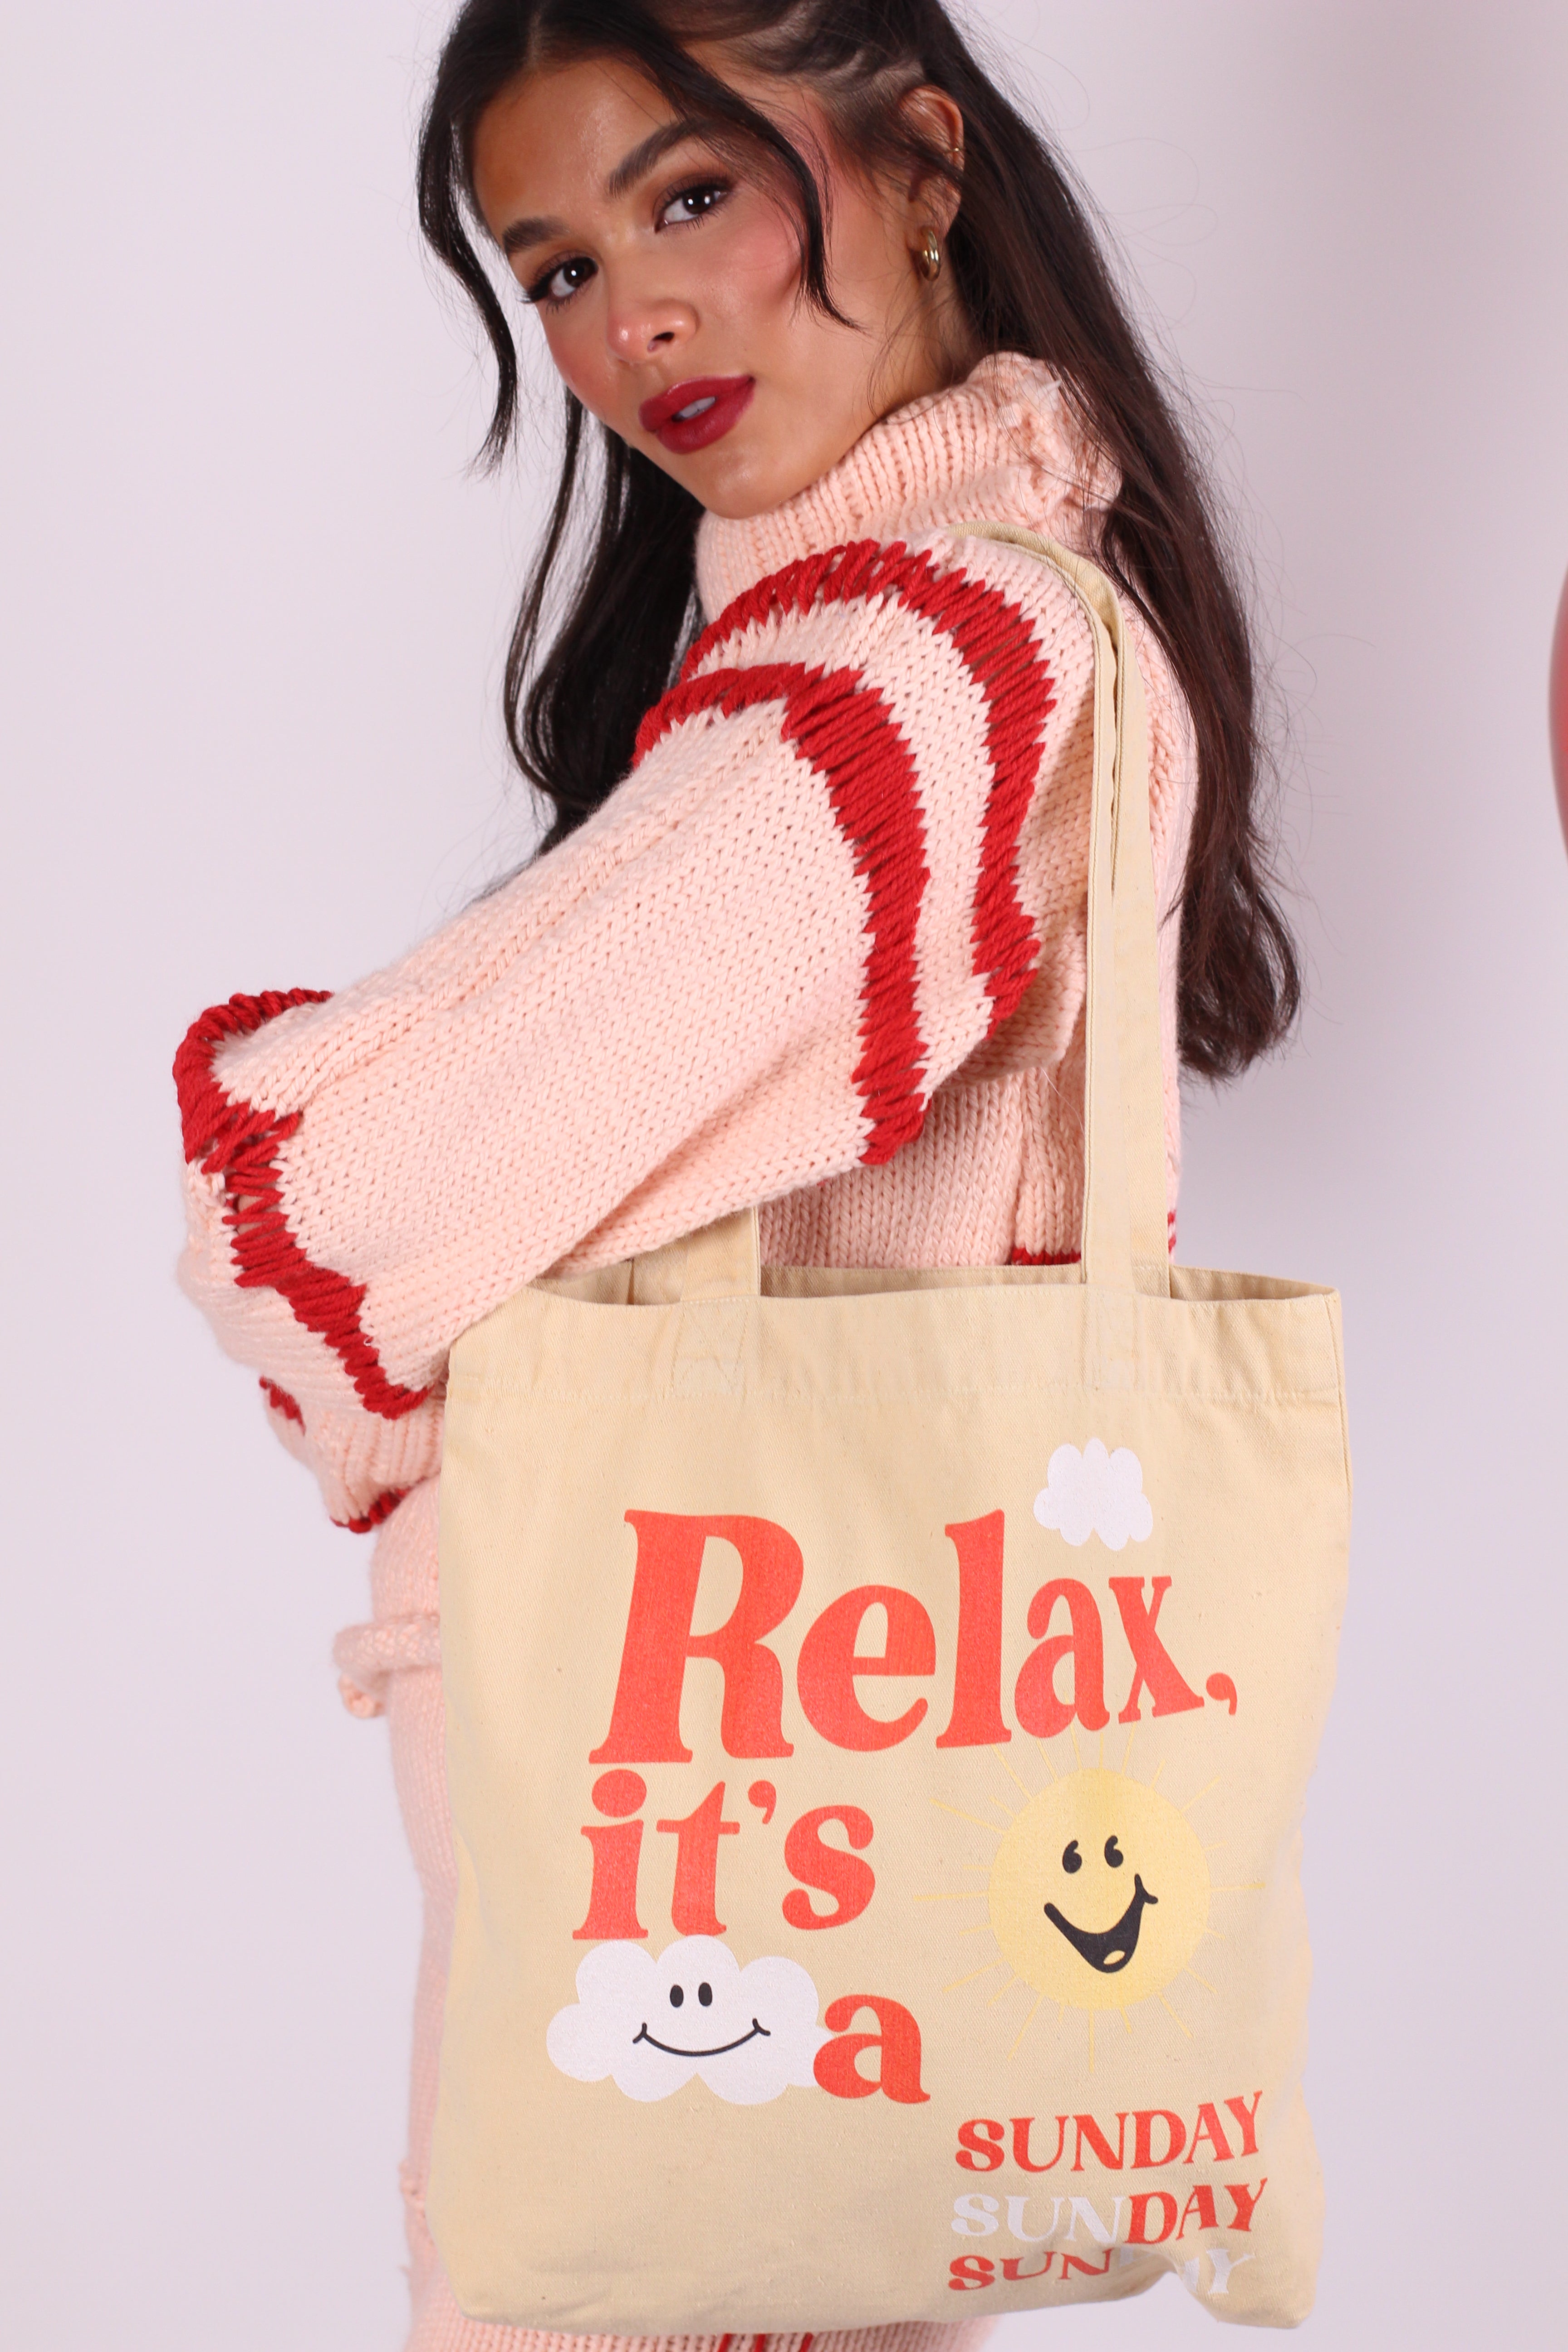 RELAX IT'S A SUNDAY TOTE BAG